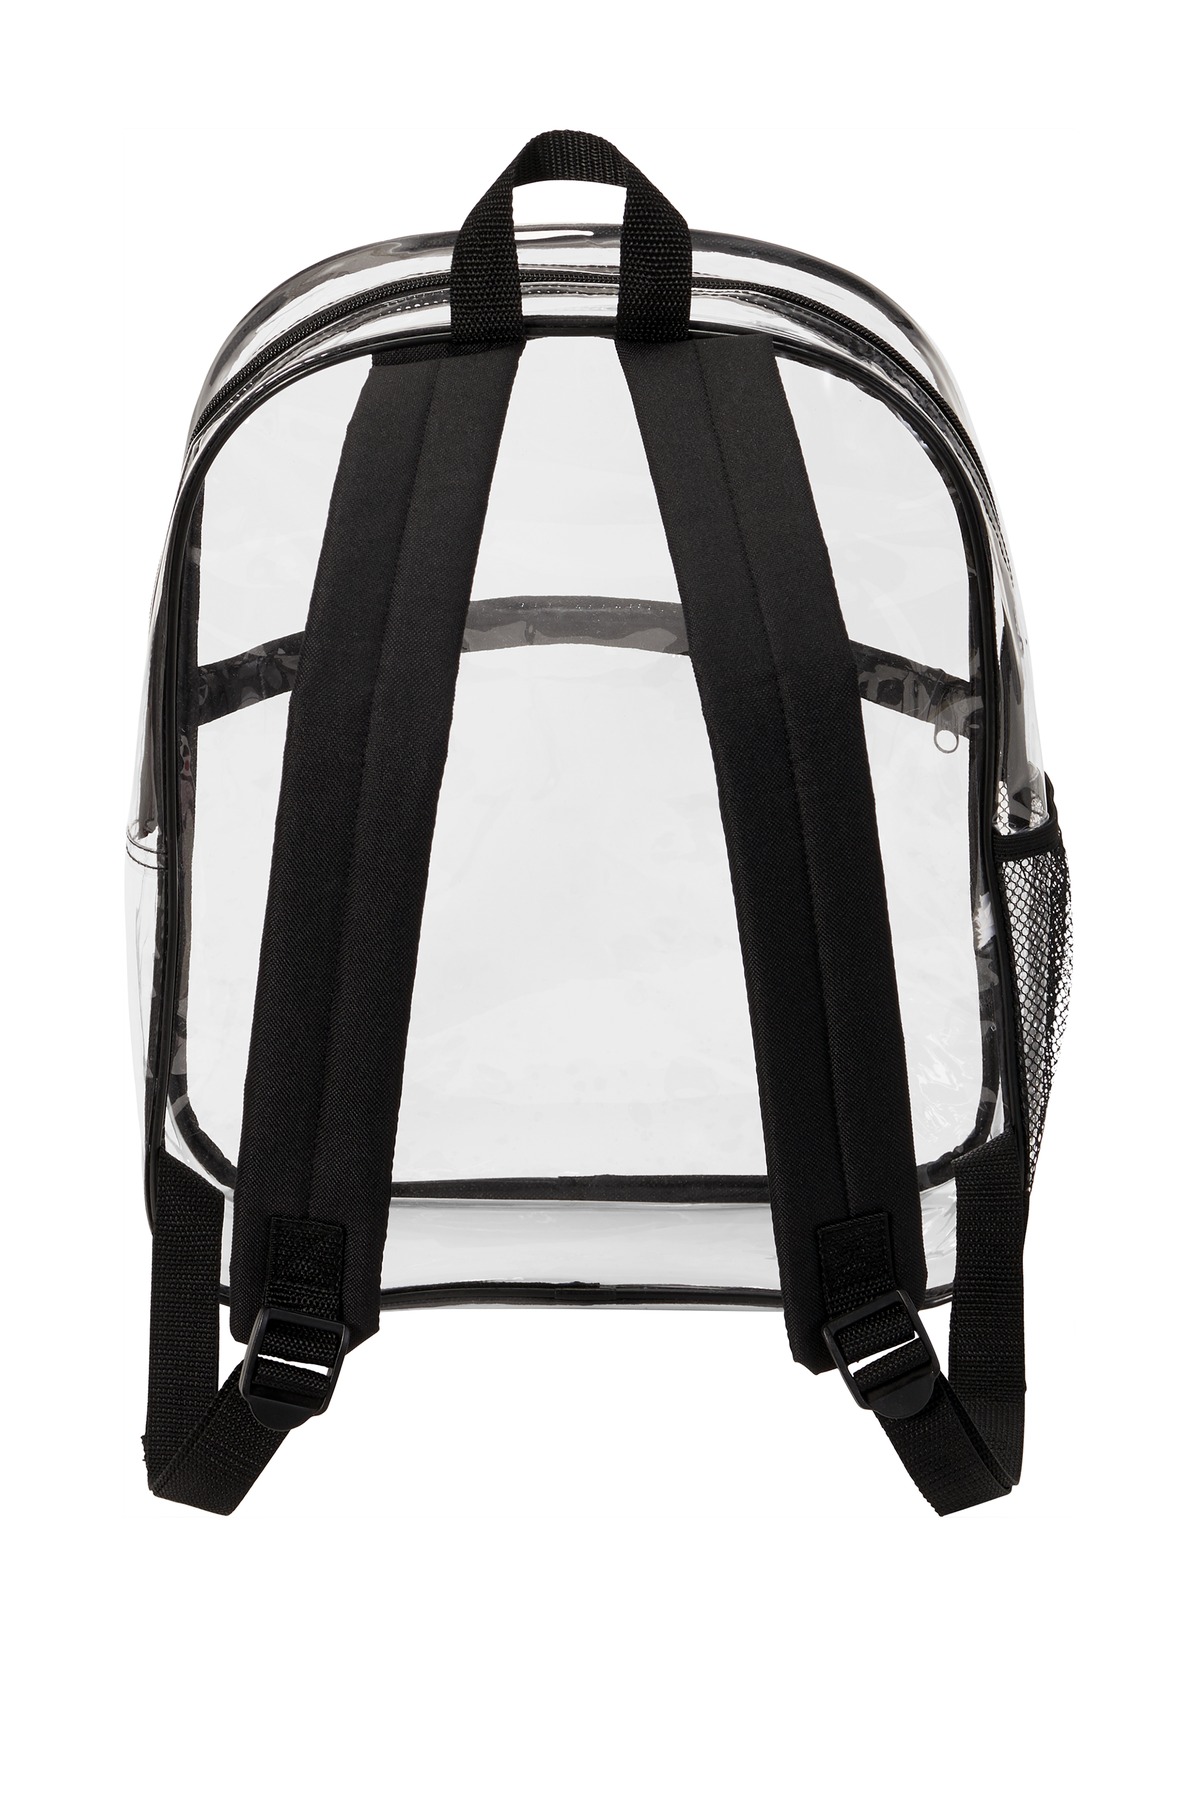 Port Authority Adult Unisex Clear Backpack Clear/Black One Size Fits All - image 3 of 3